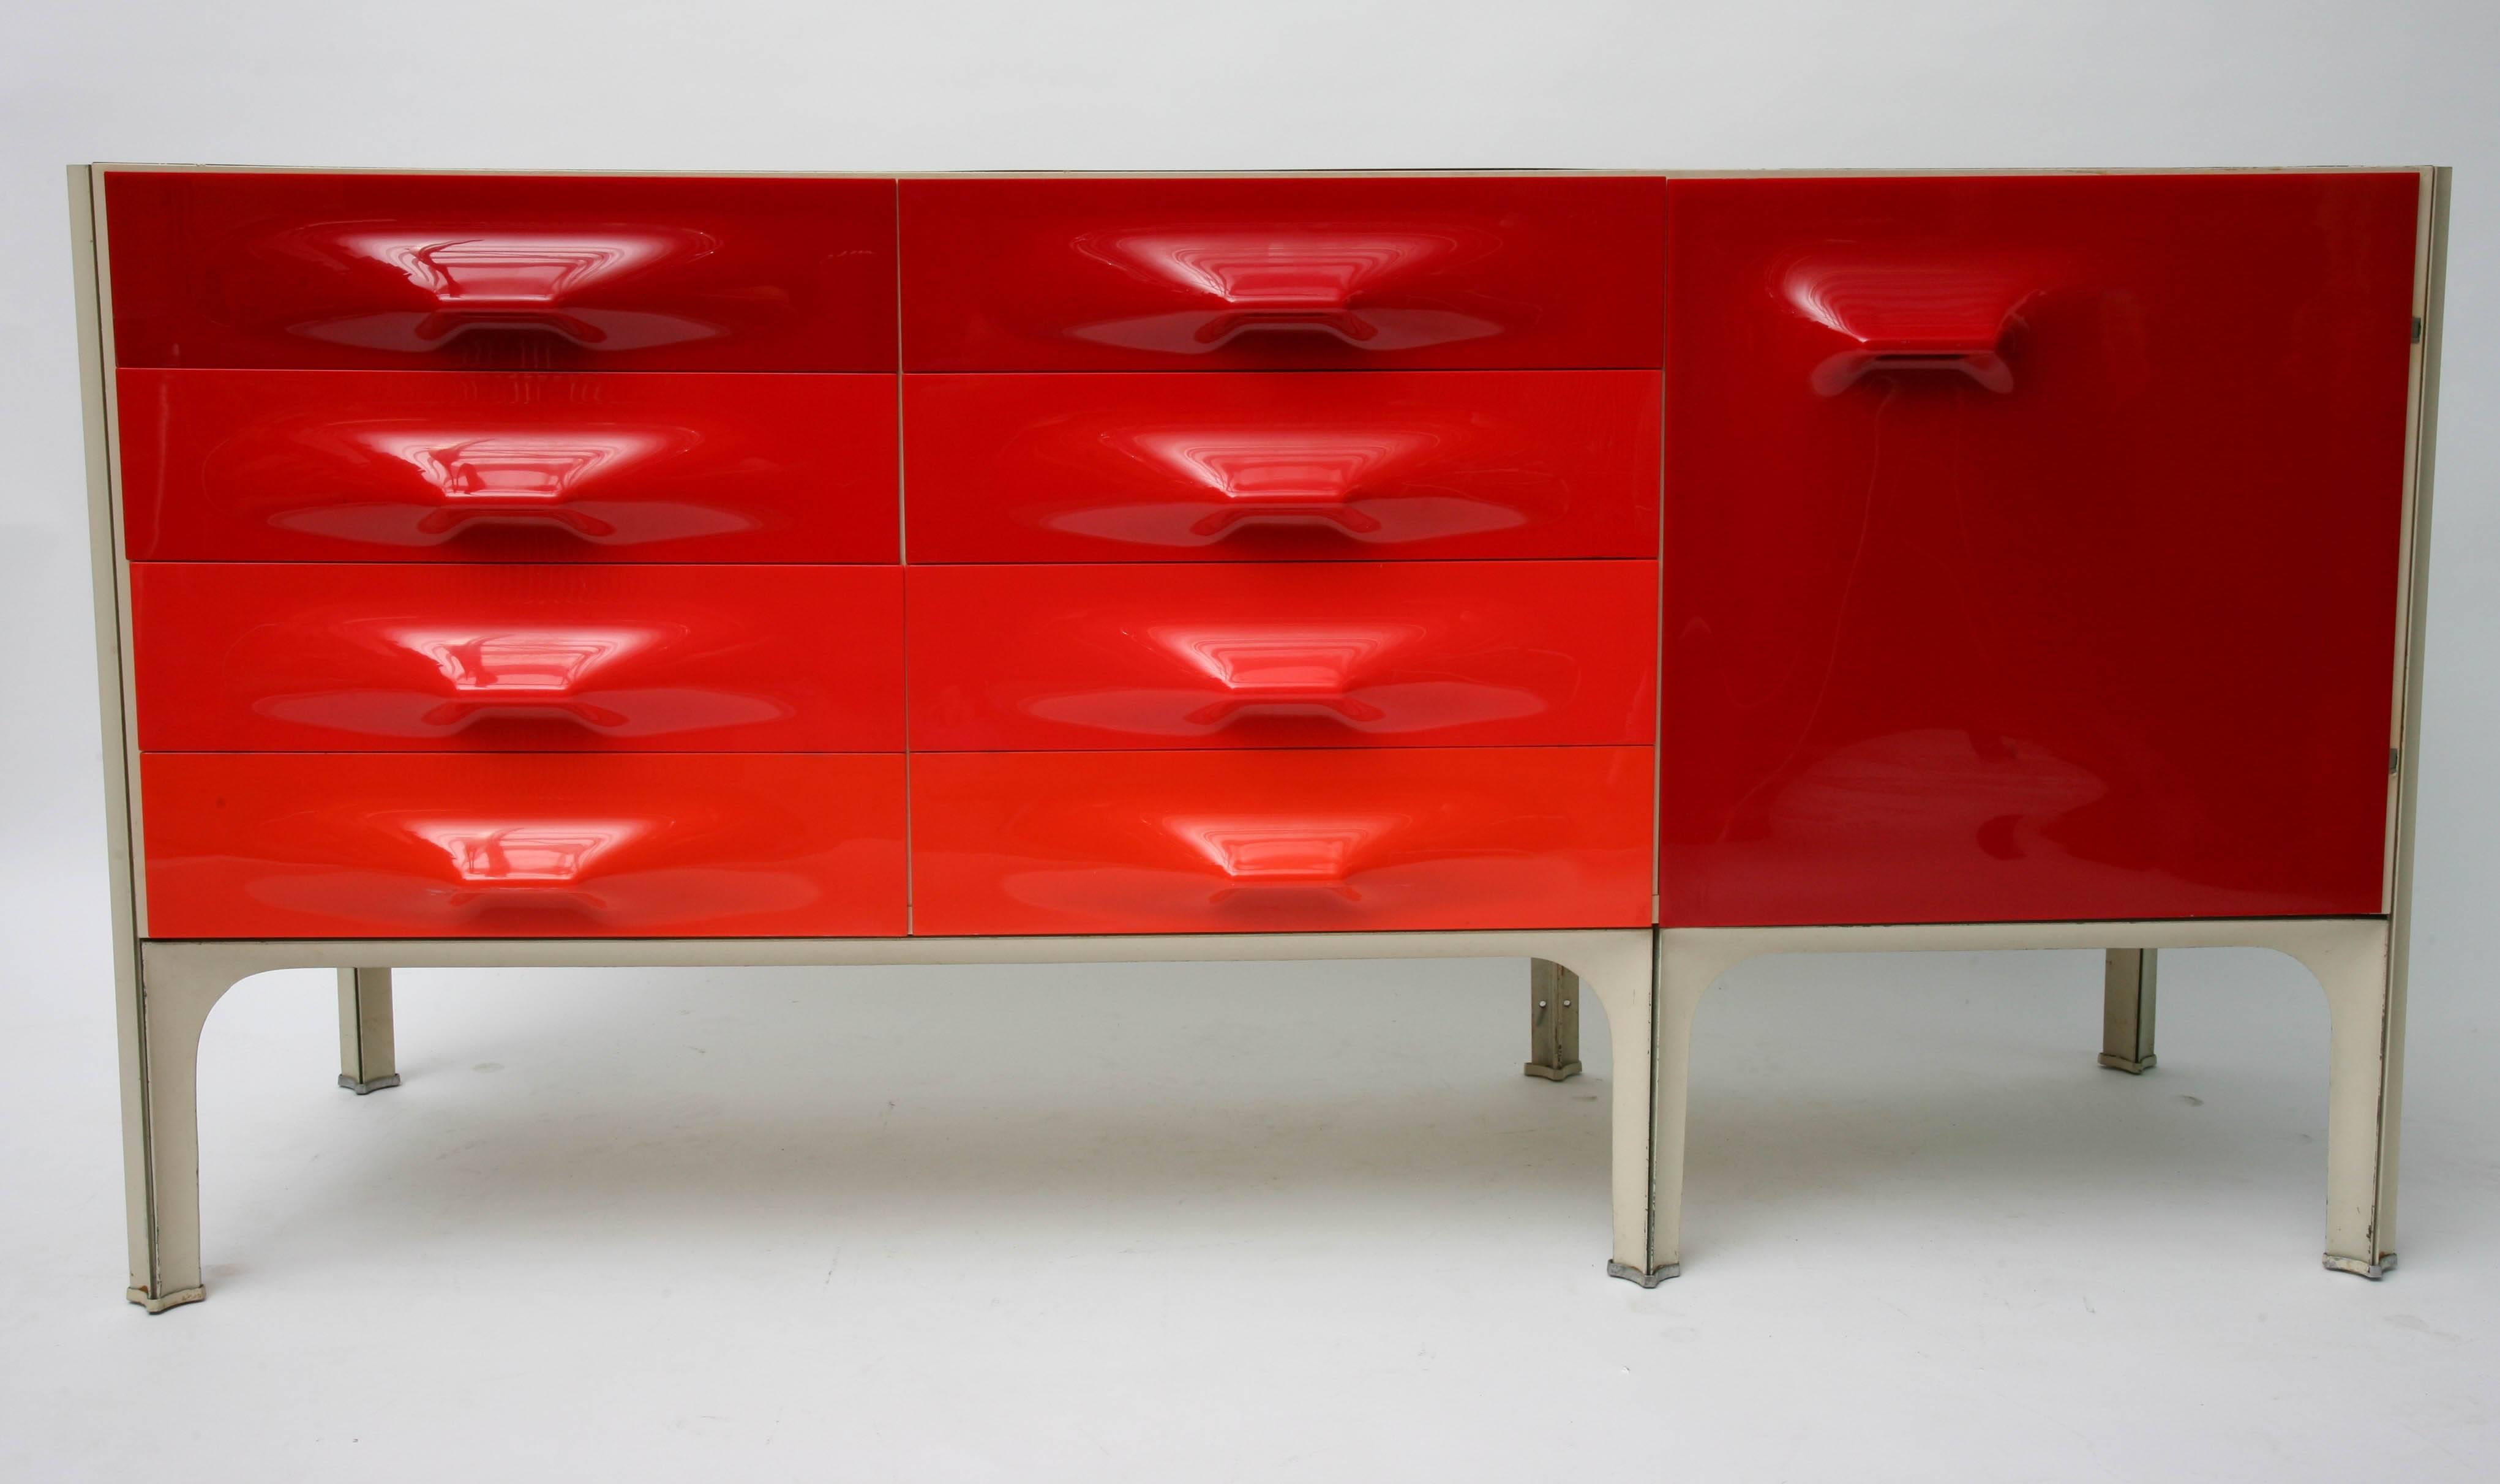 A wonderful design by an important designer.
The cabinet is in great condition including the original feet.